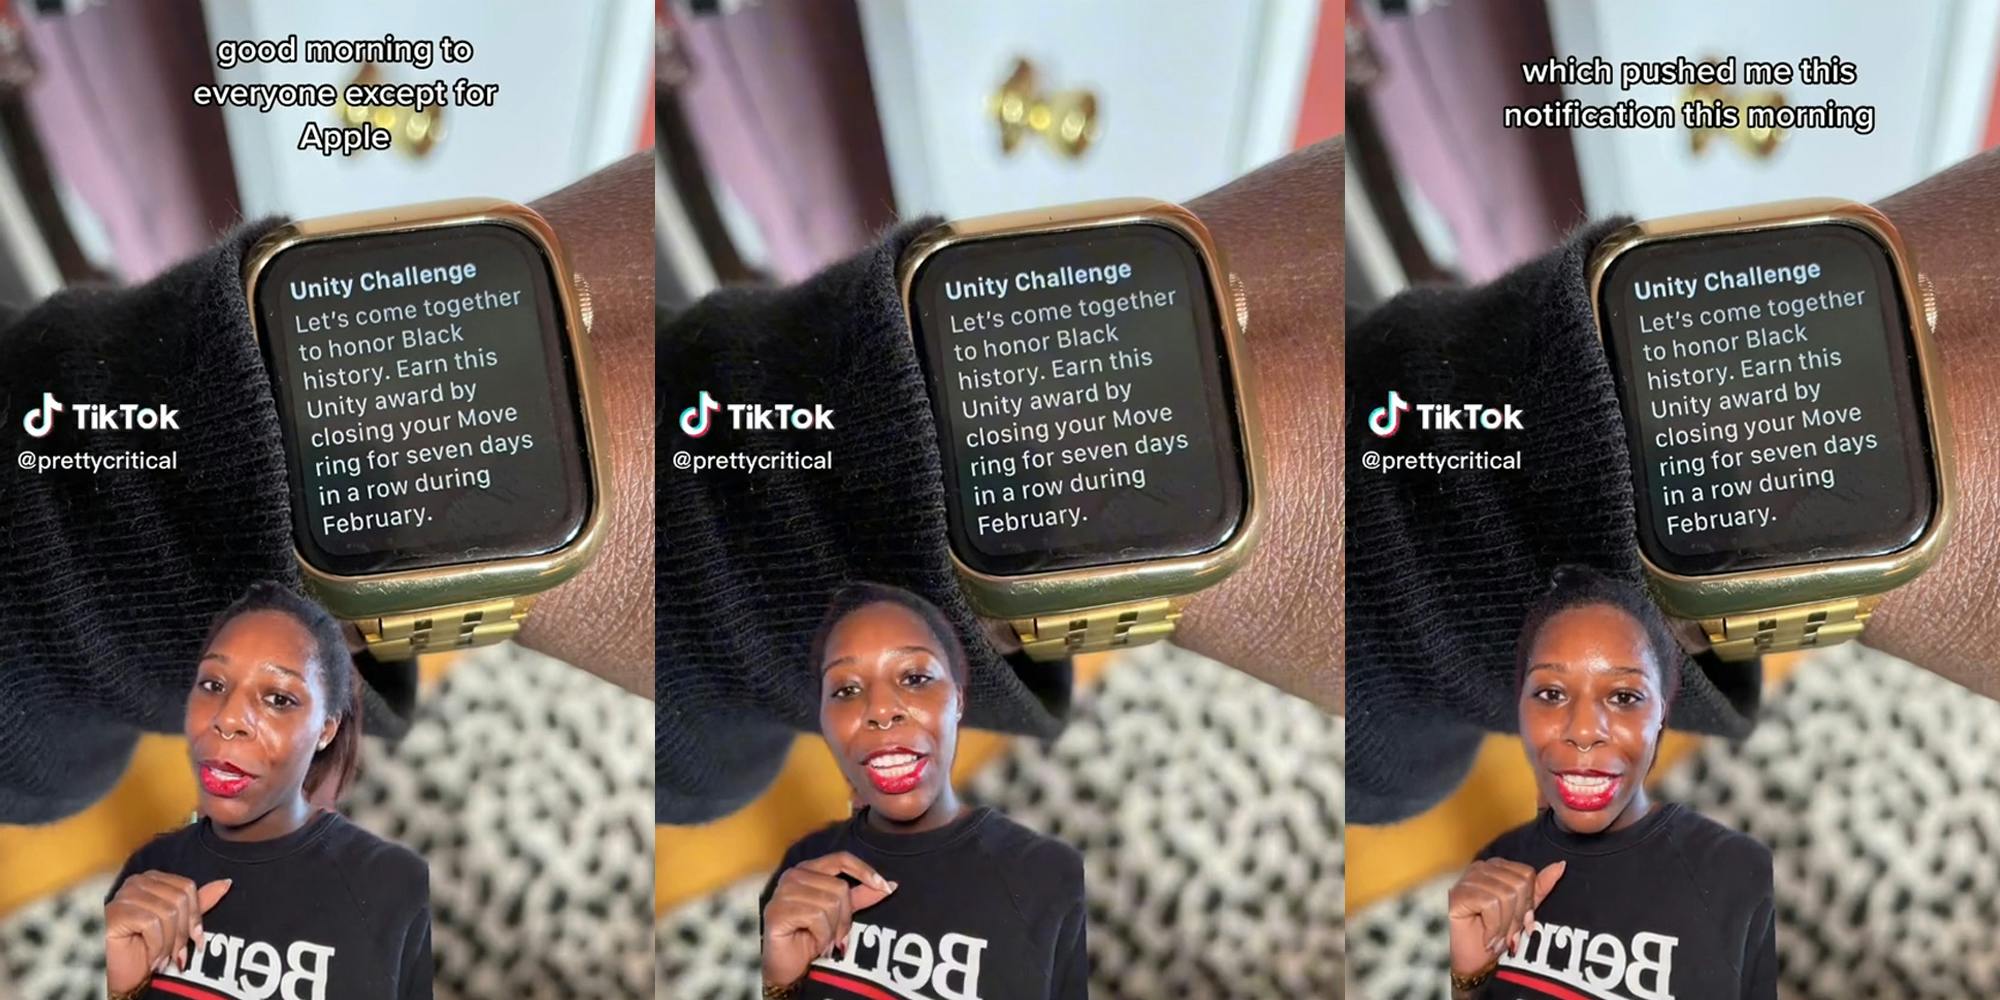 woman reacting to apple watch "unity challenge" push notification